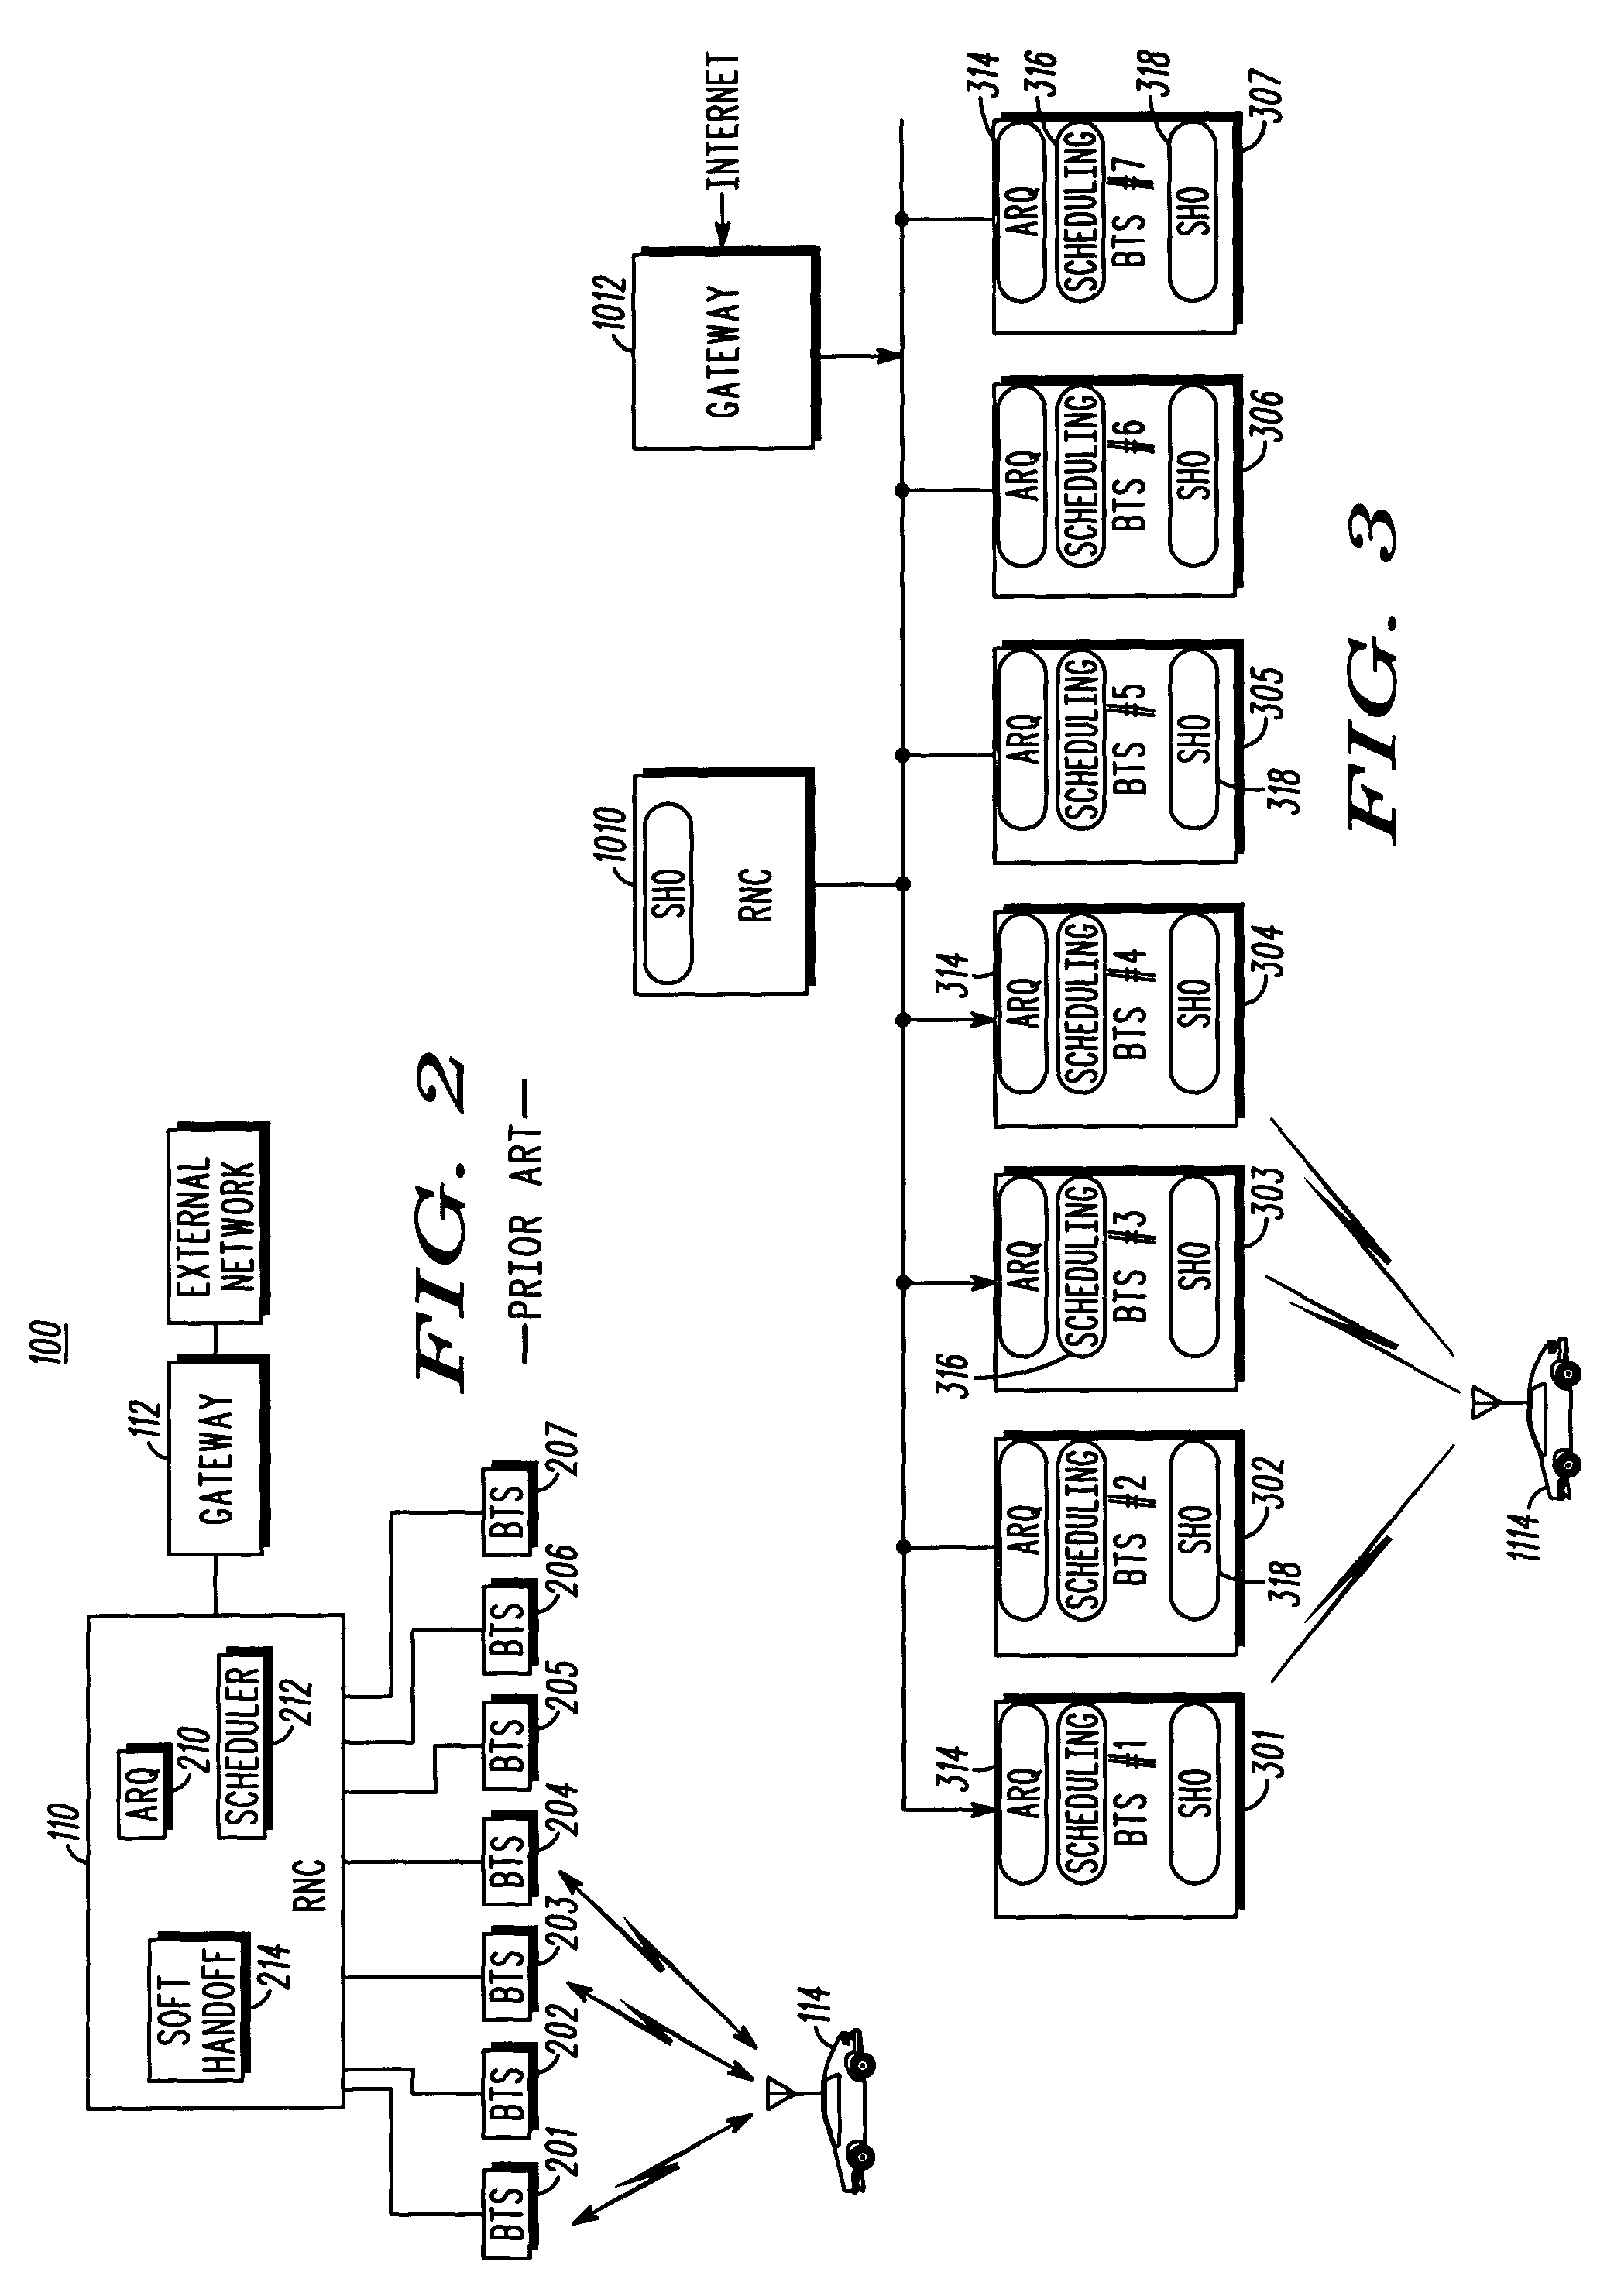 Enhanced uplink rate selection by a communication device during soft handoff